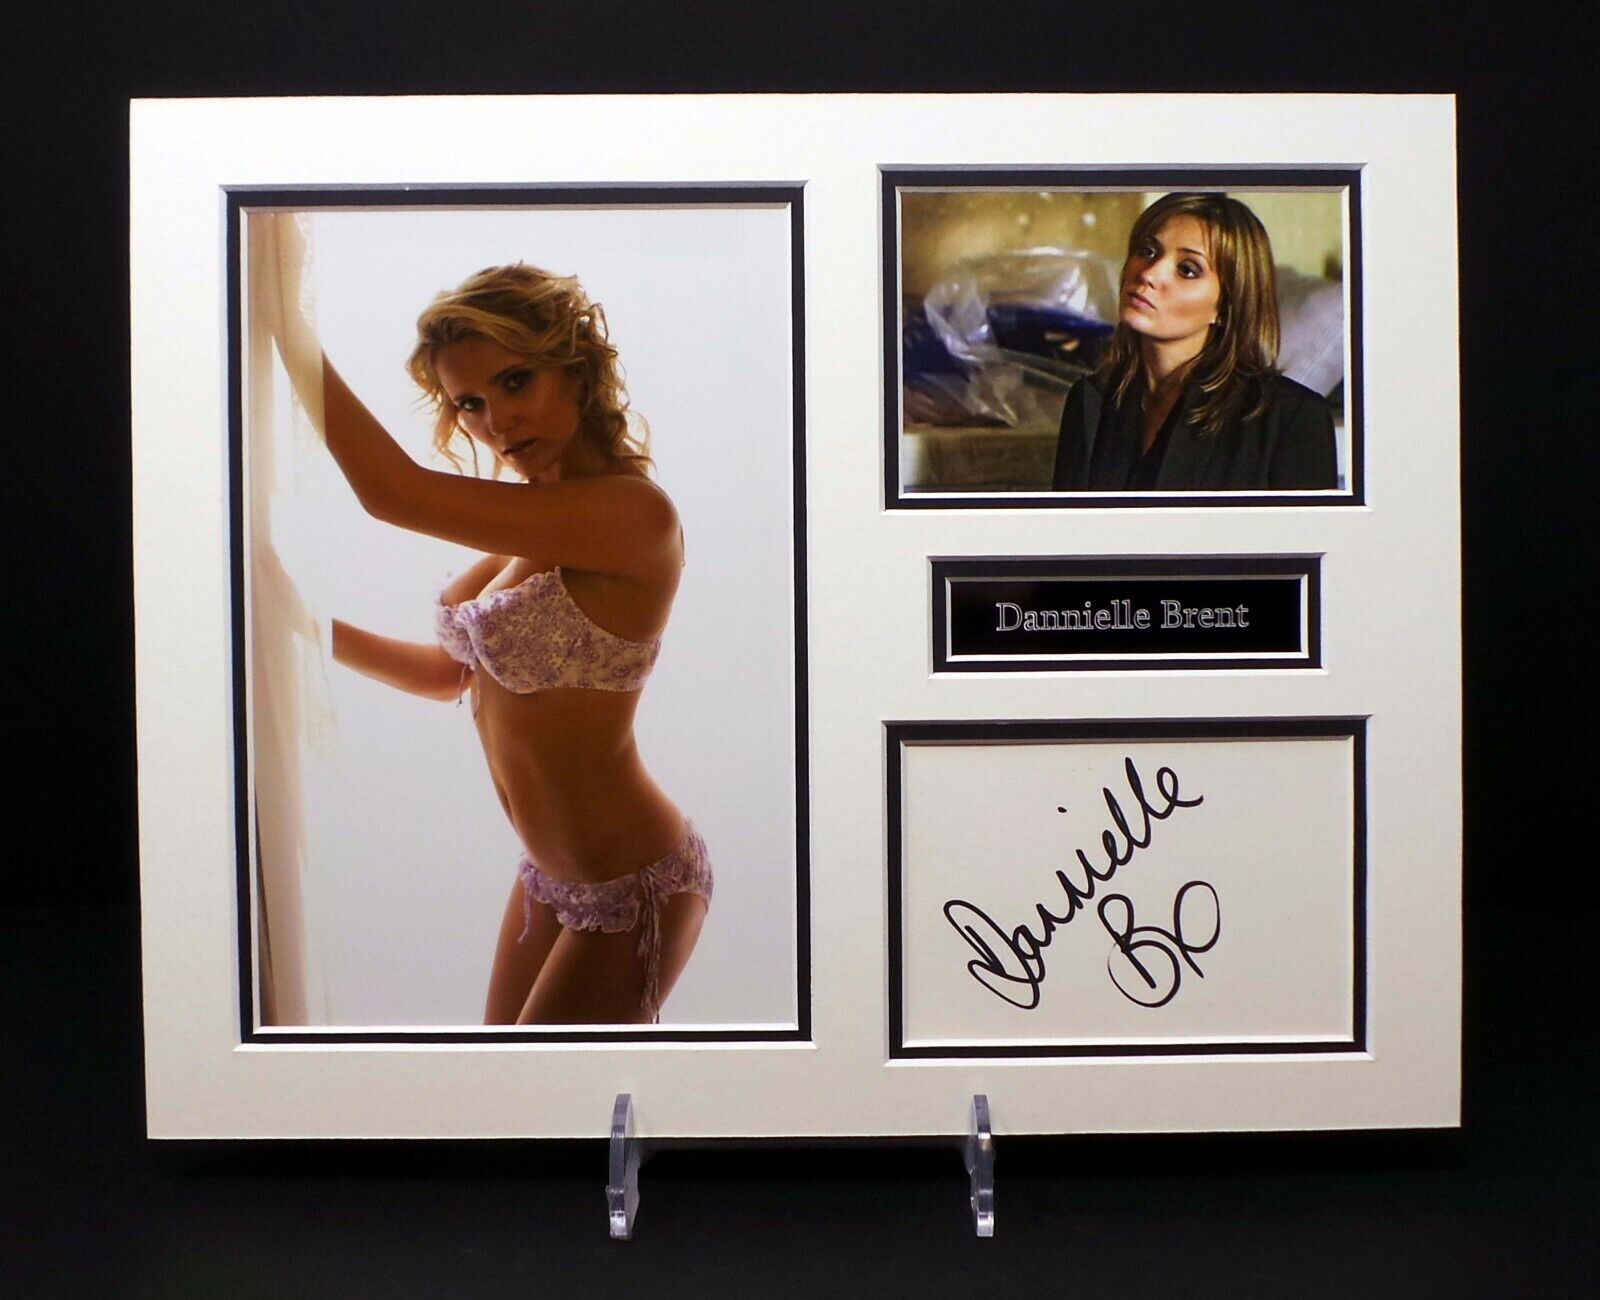 Dannielle BRENT Signed Mounted SEXY Photo Poster painting Display AFTAL RD COA Bad Girls Actress